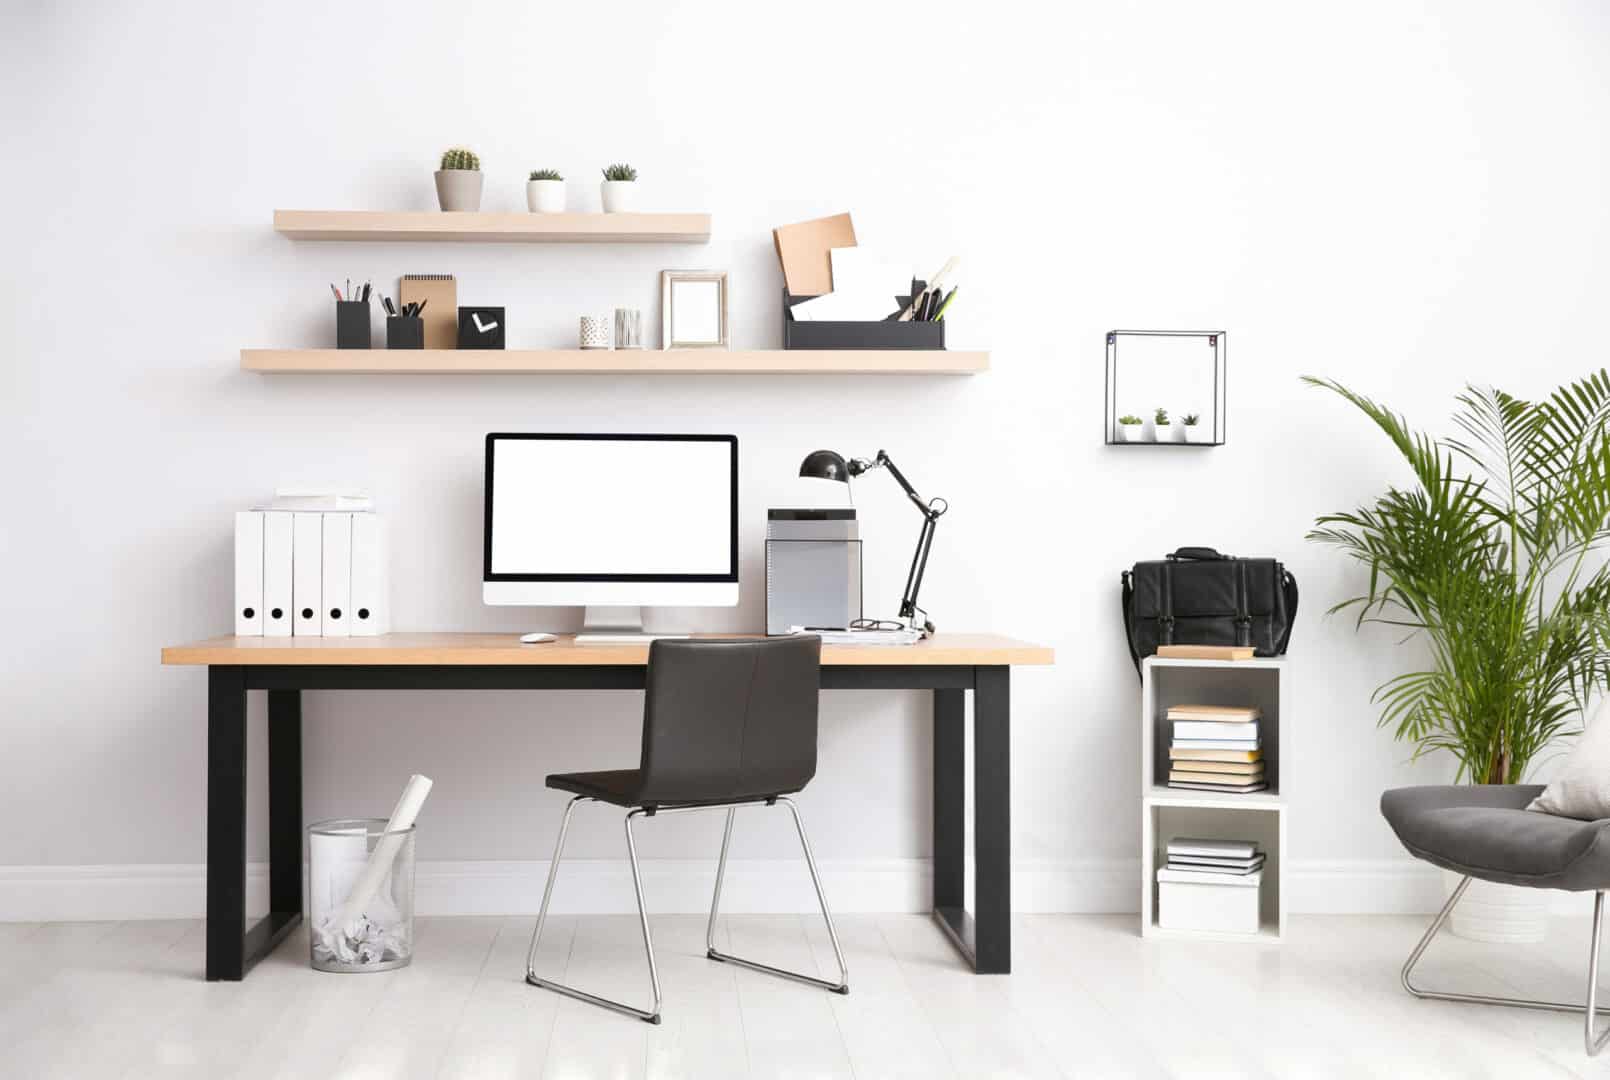 7 Tips to Building The Perfect Home Office